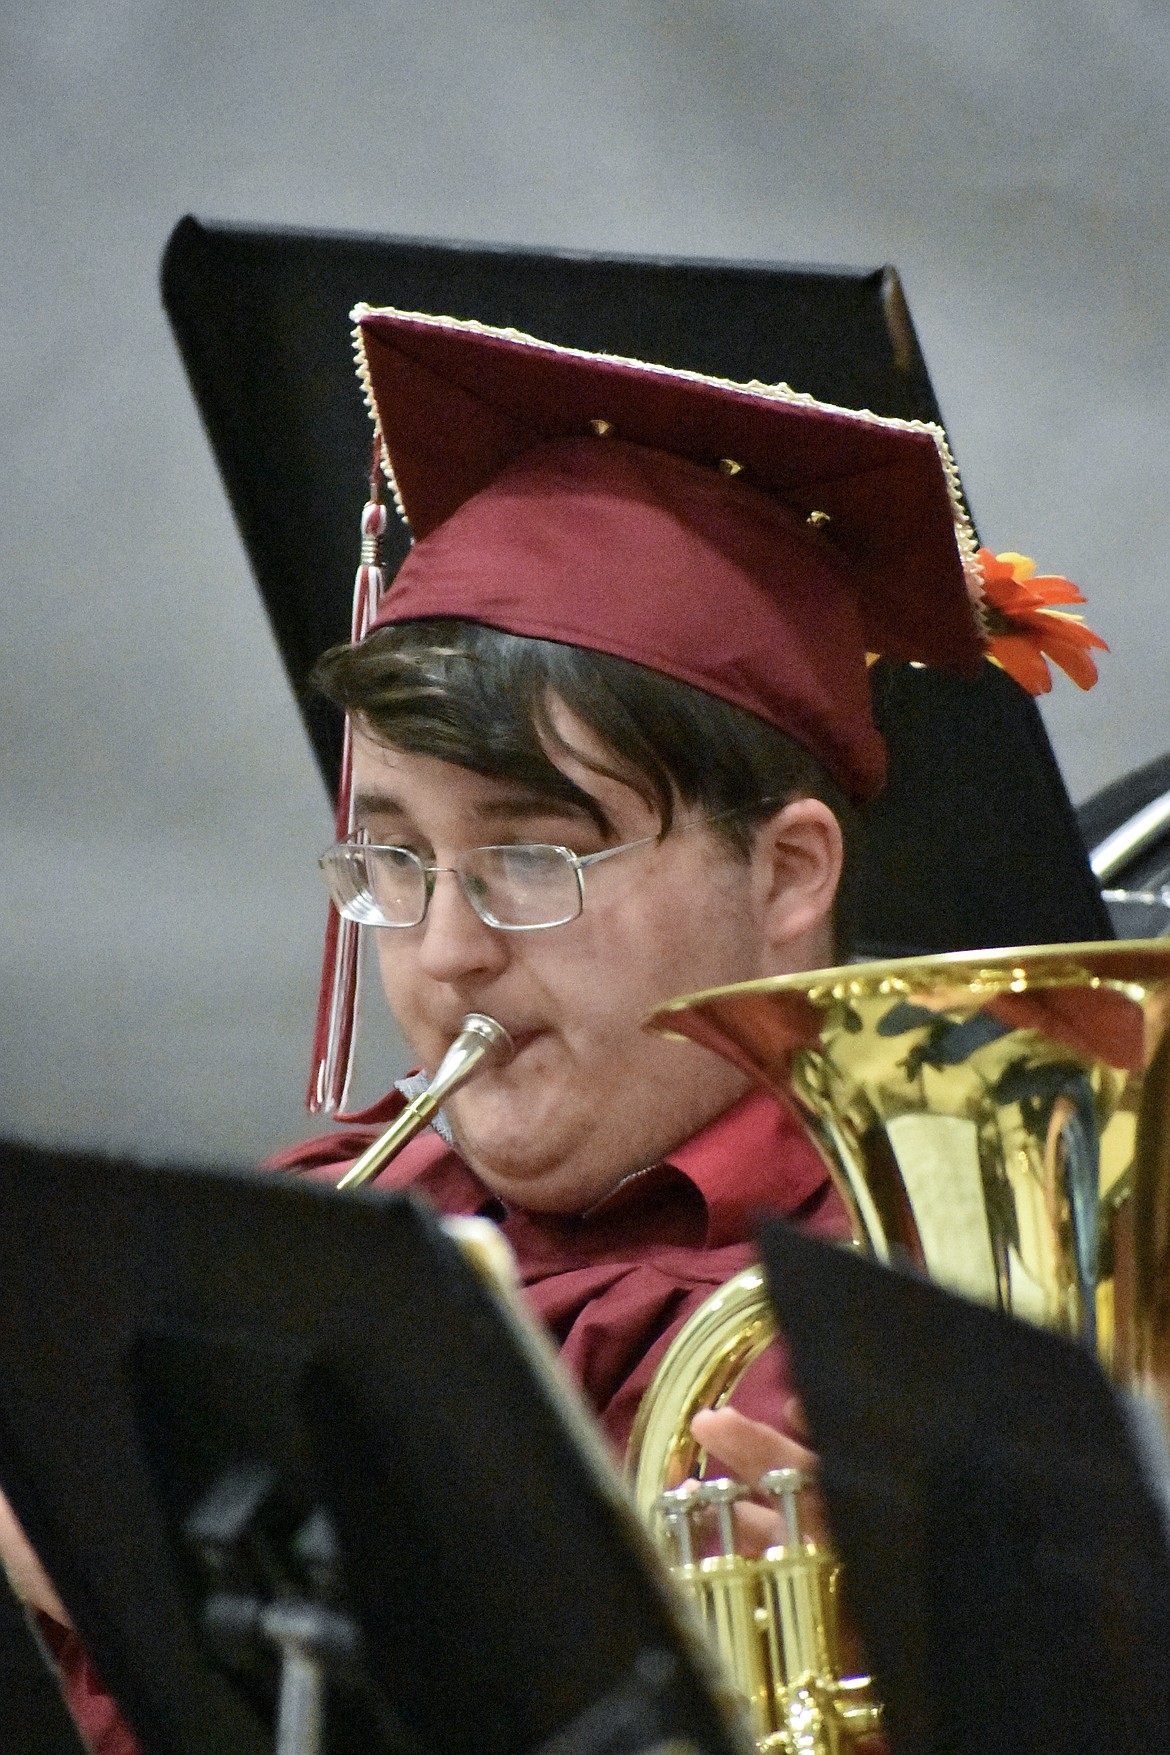 Troy graduate Johnathn Fossen plays as part of the Troy High School Band performing highlights from Moana, during Troy&#146;s graduation ceremony on Saturday, June 2, 2018. (Ben Kibbey/The Western News)